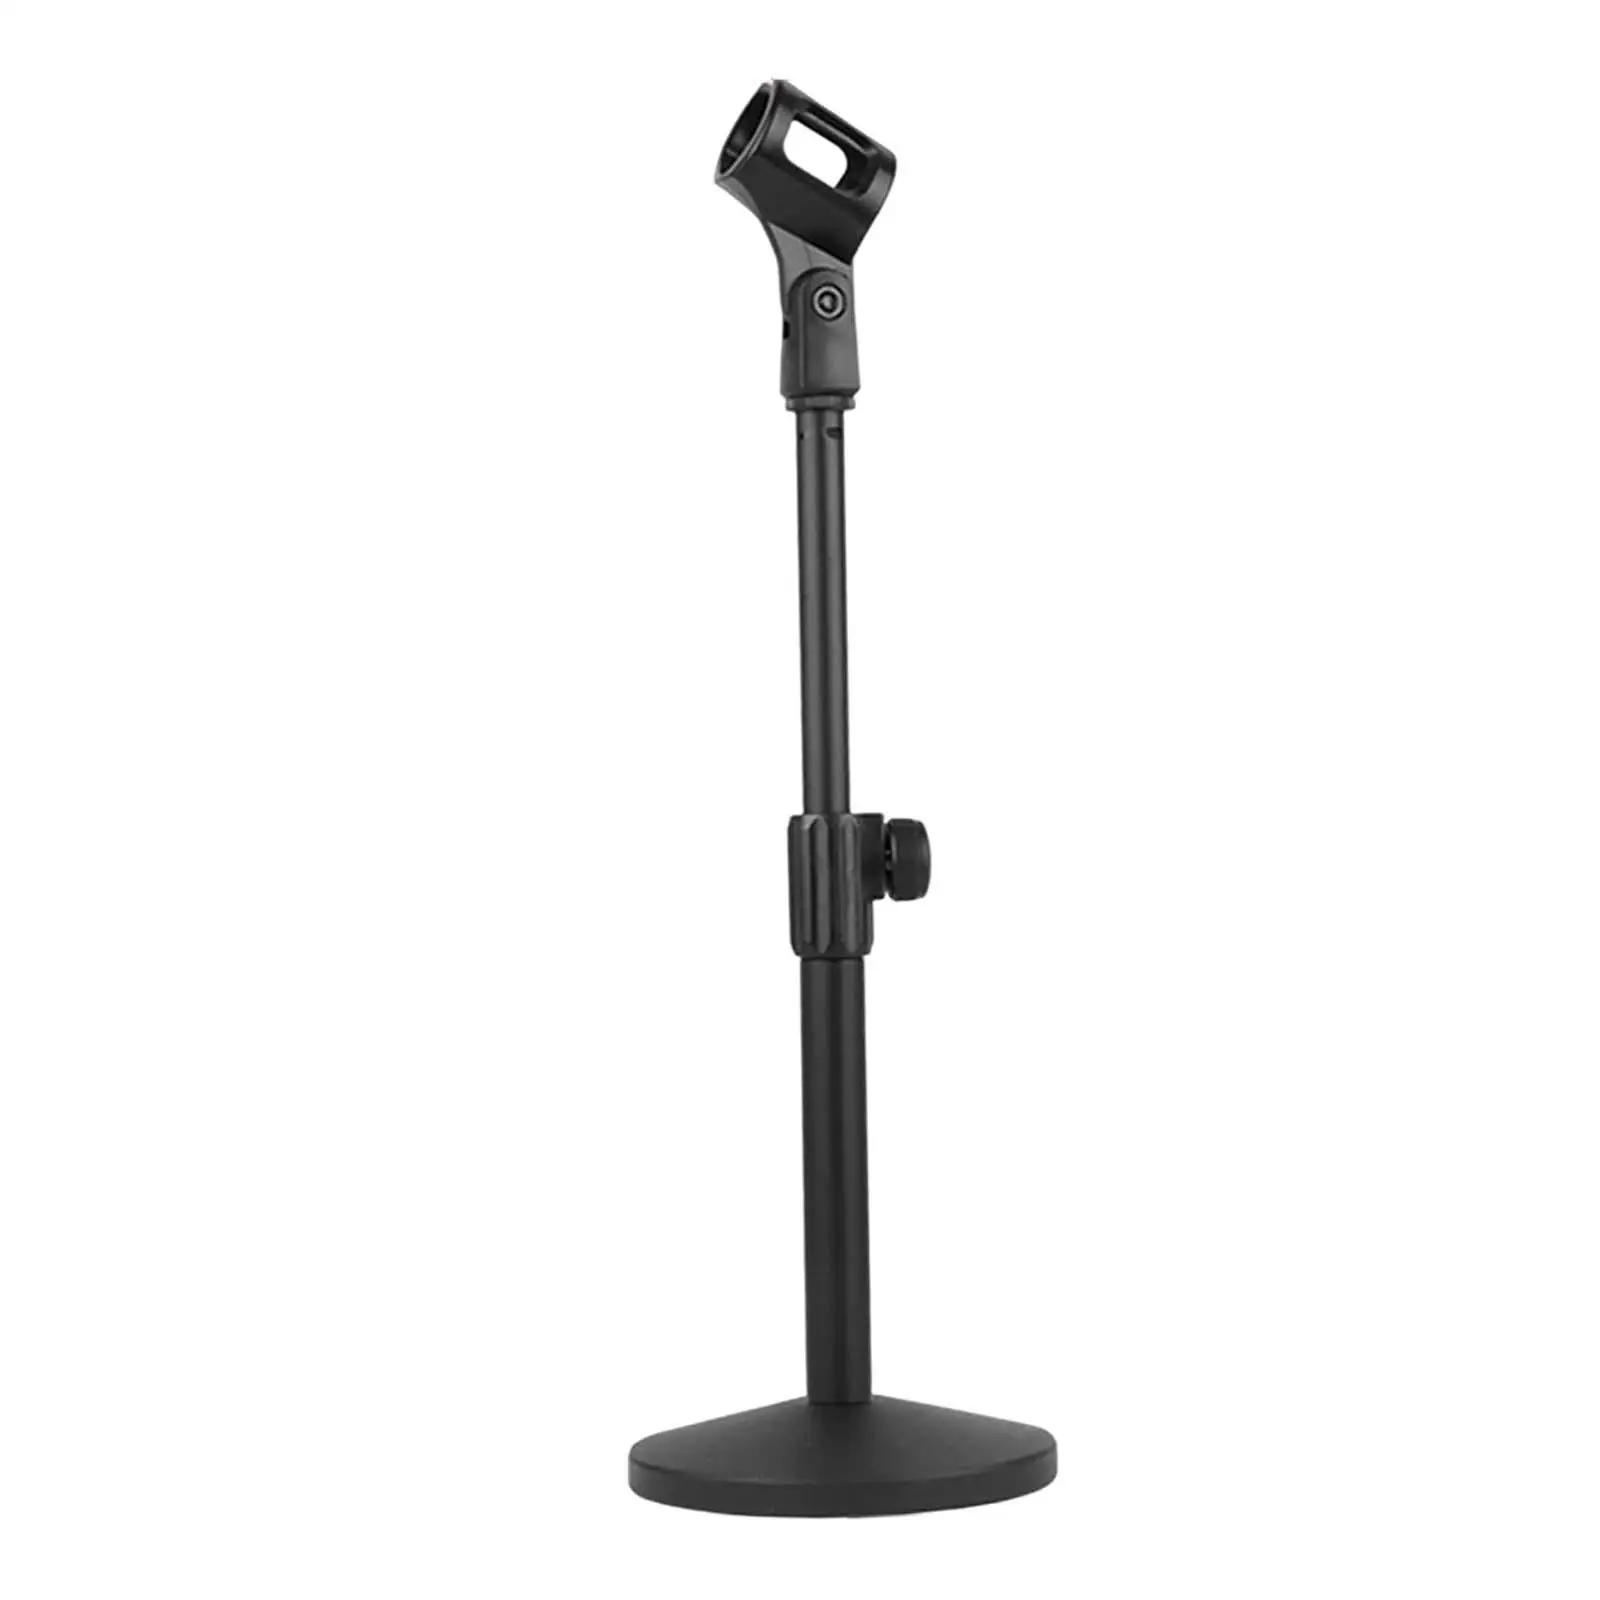 Adjustable Table Mic Stand Desktop Microphone Stand for Concert Conference Home Stage Performance